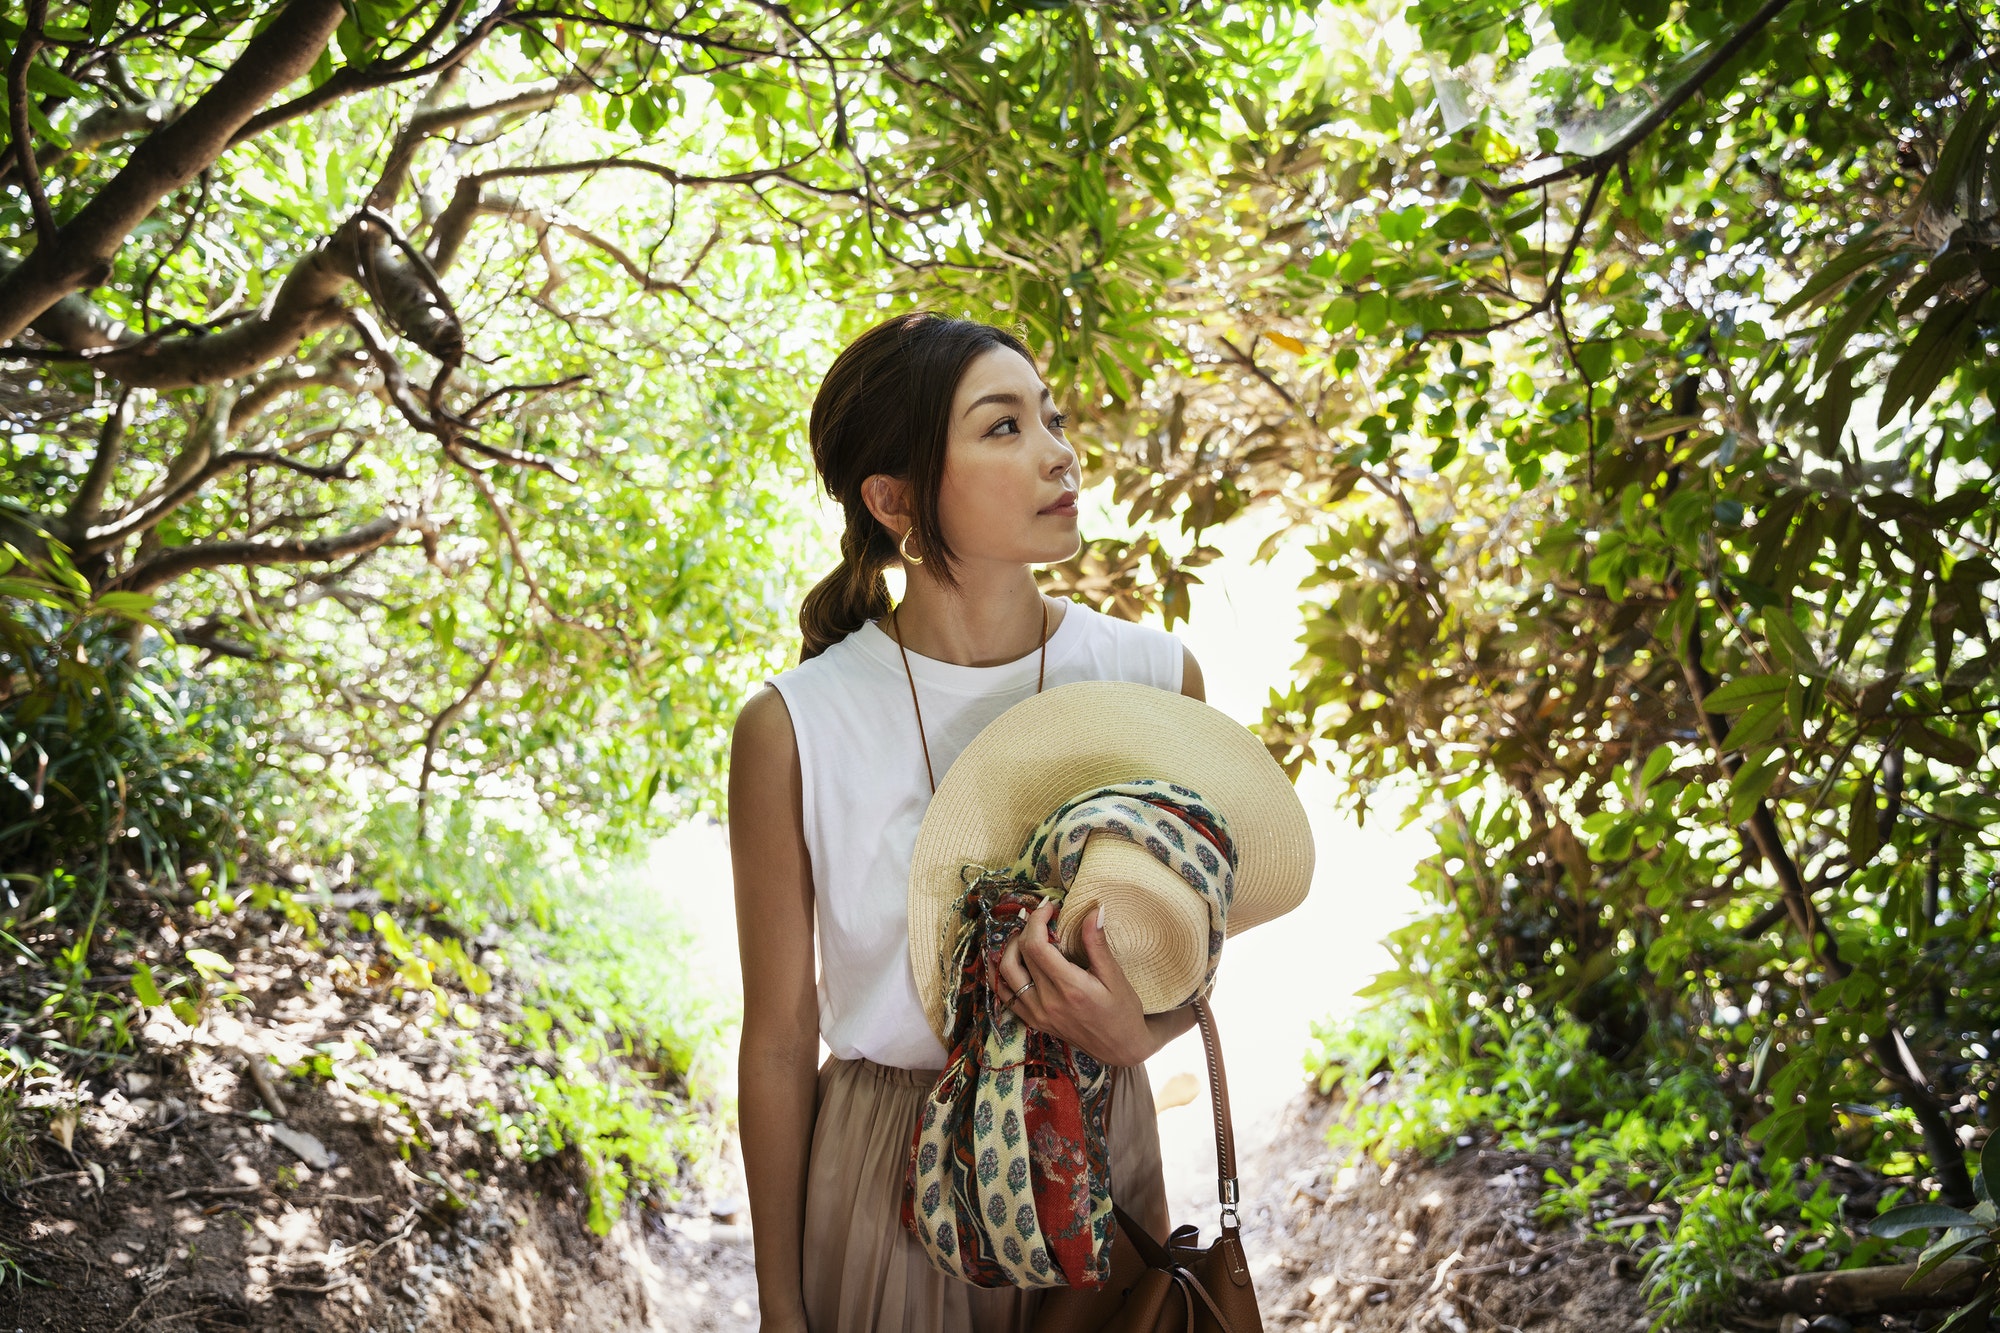 Japanese woman carrying hat hiking in a forest.